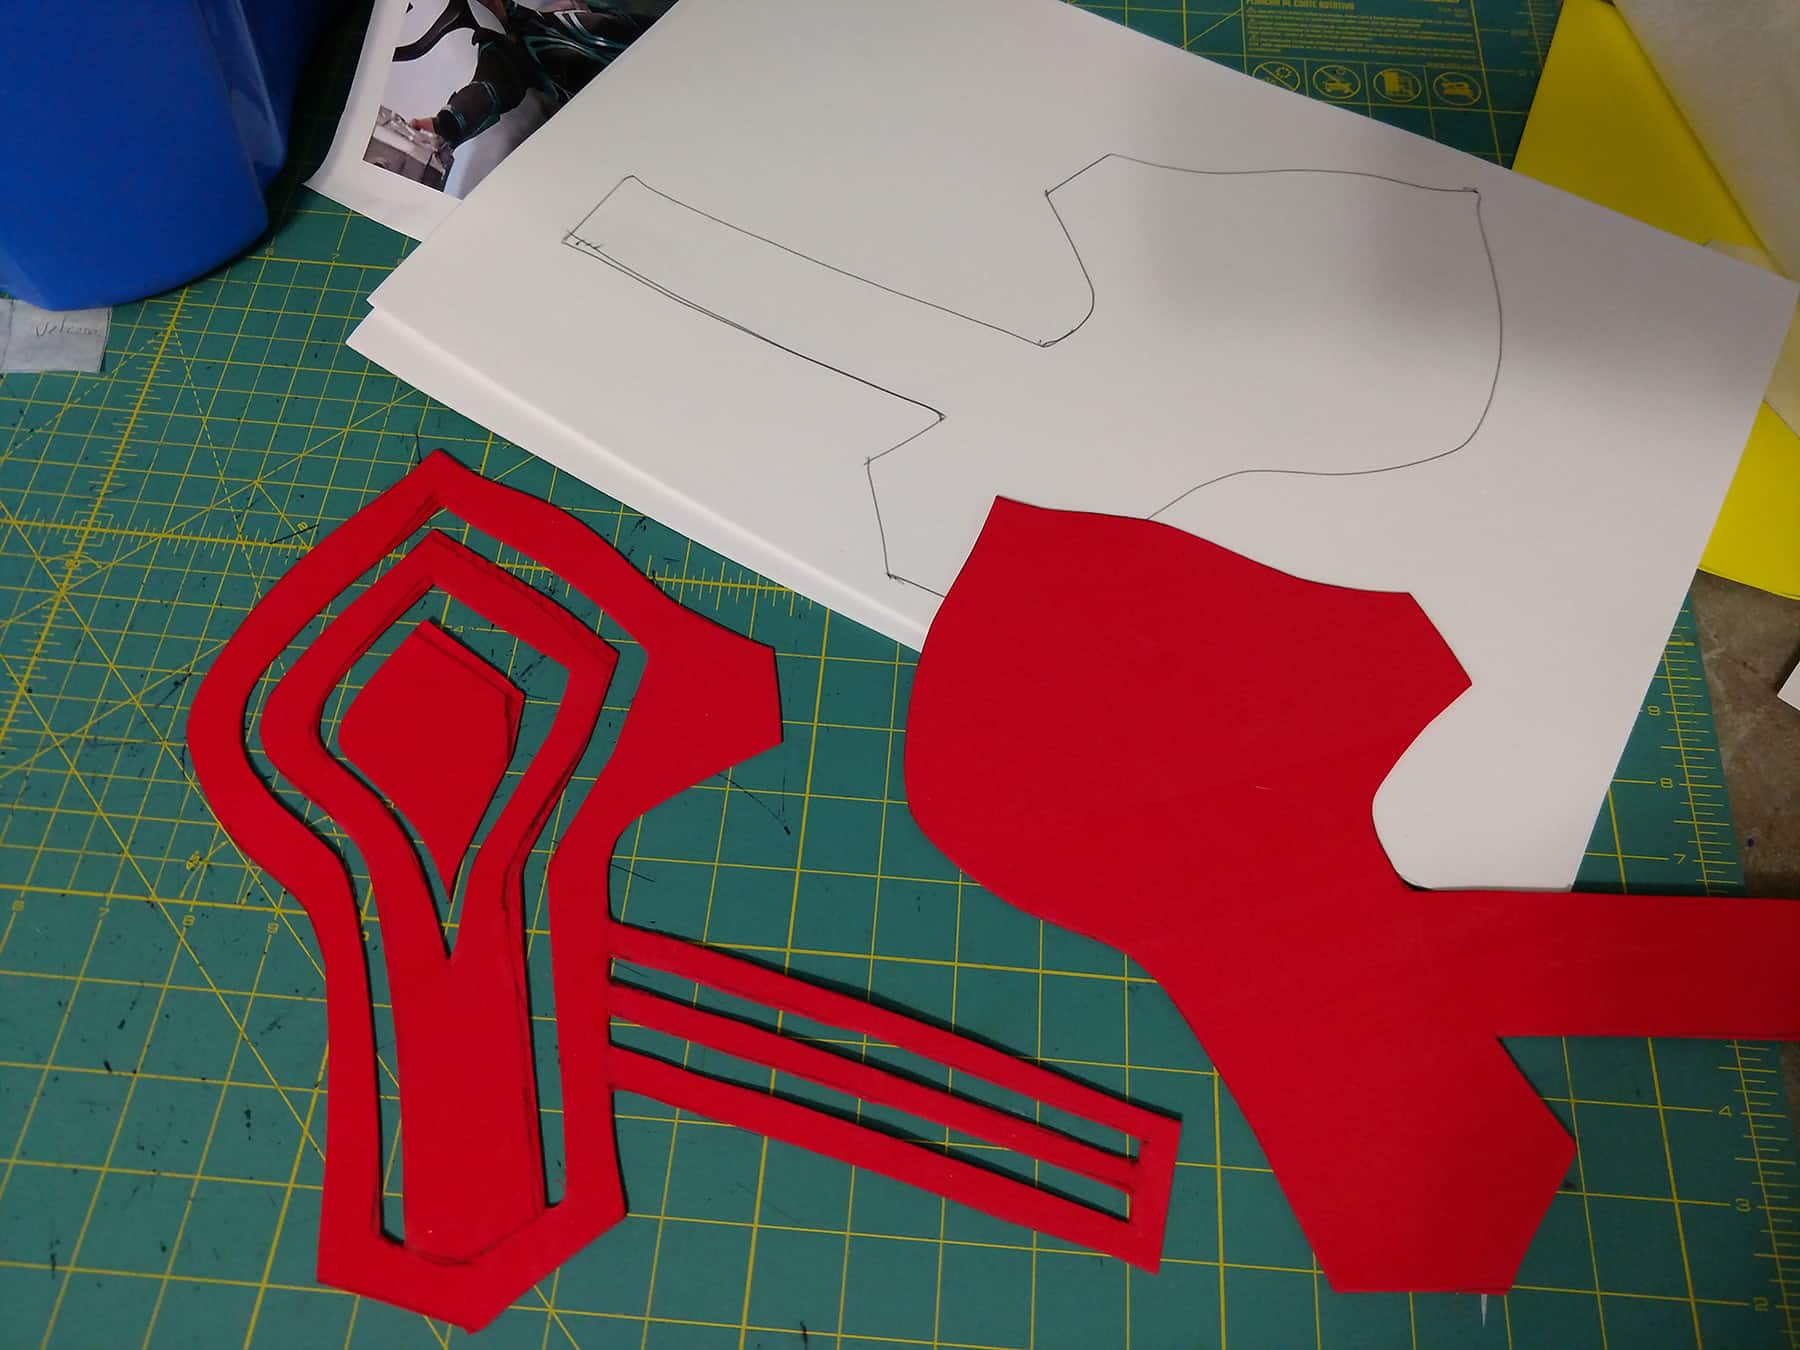 Two pieces of red craft foam have been cut into a base pattern piece, and one with channels cut out of it.